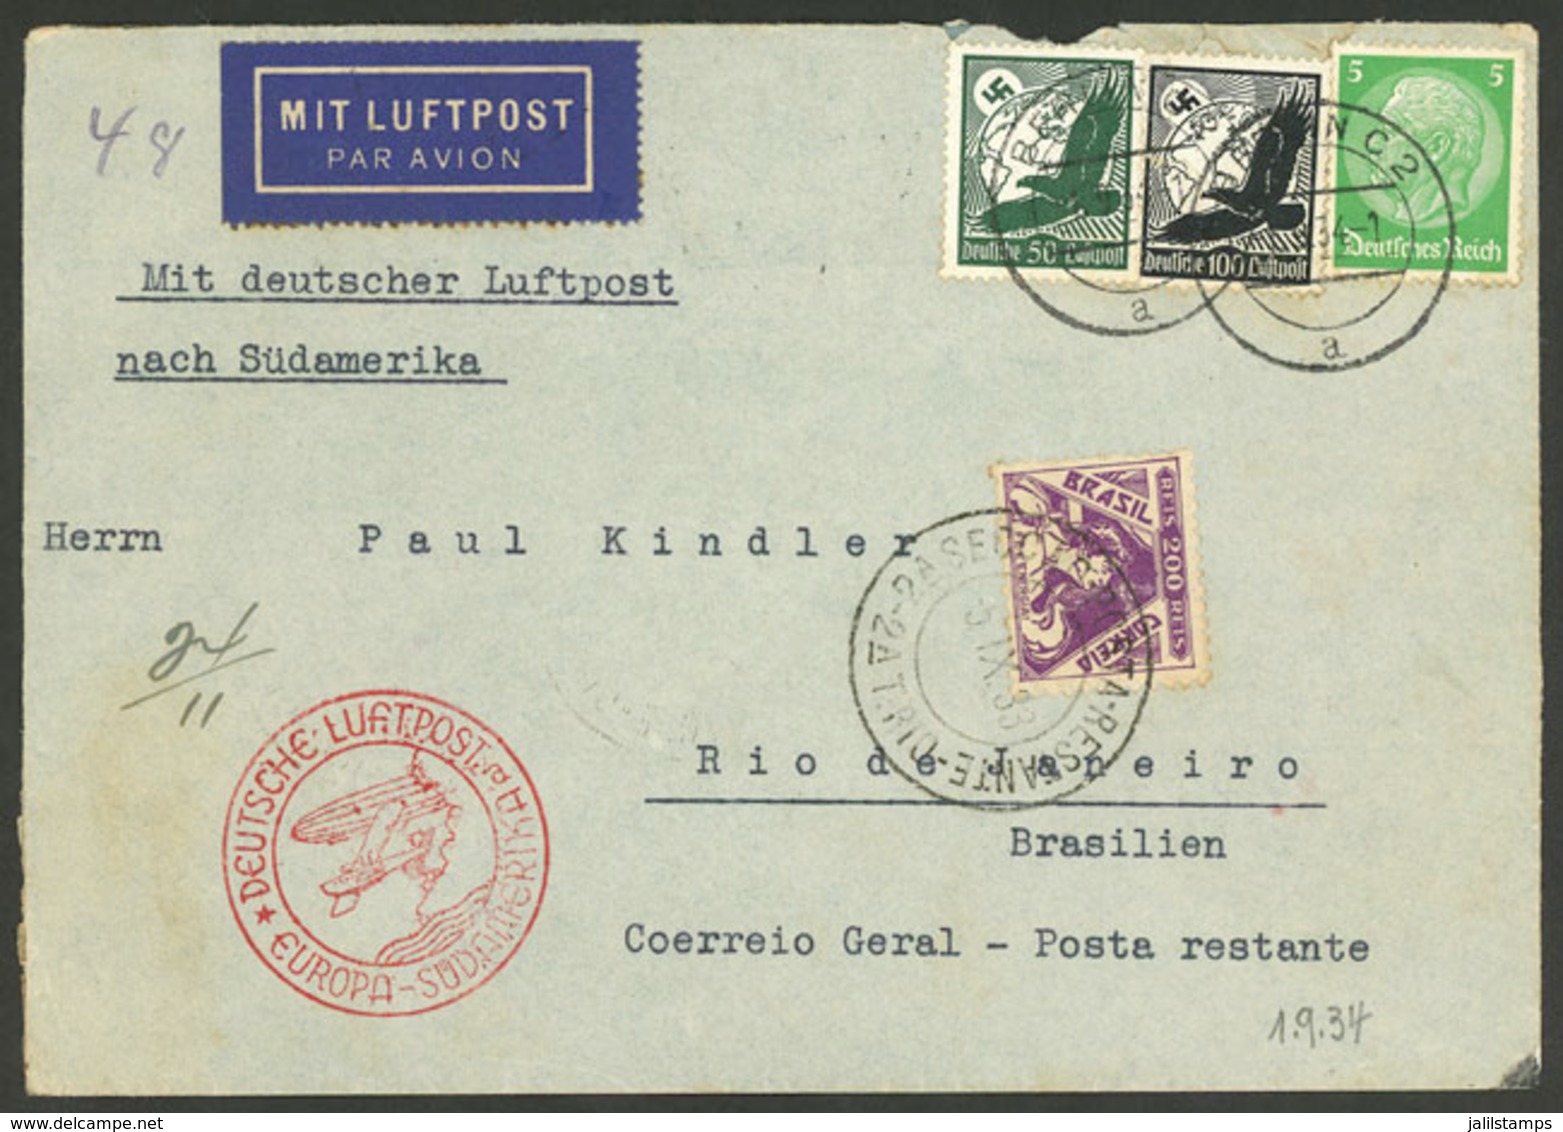 GERMANY: MIXED POSTAGE: Airmail Cover Sent From Berlin To Rio De Janeiro (Poste Restante) On 1/SE/1933, With German Post - Brieven En Documenten